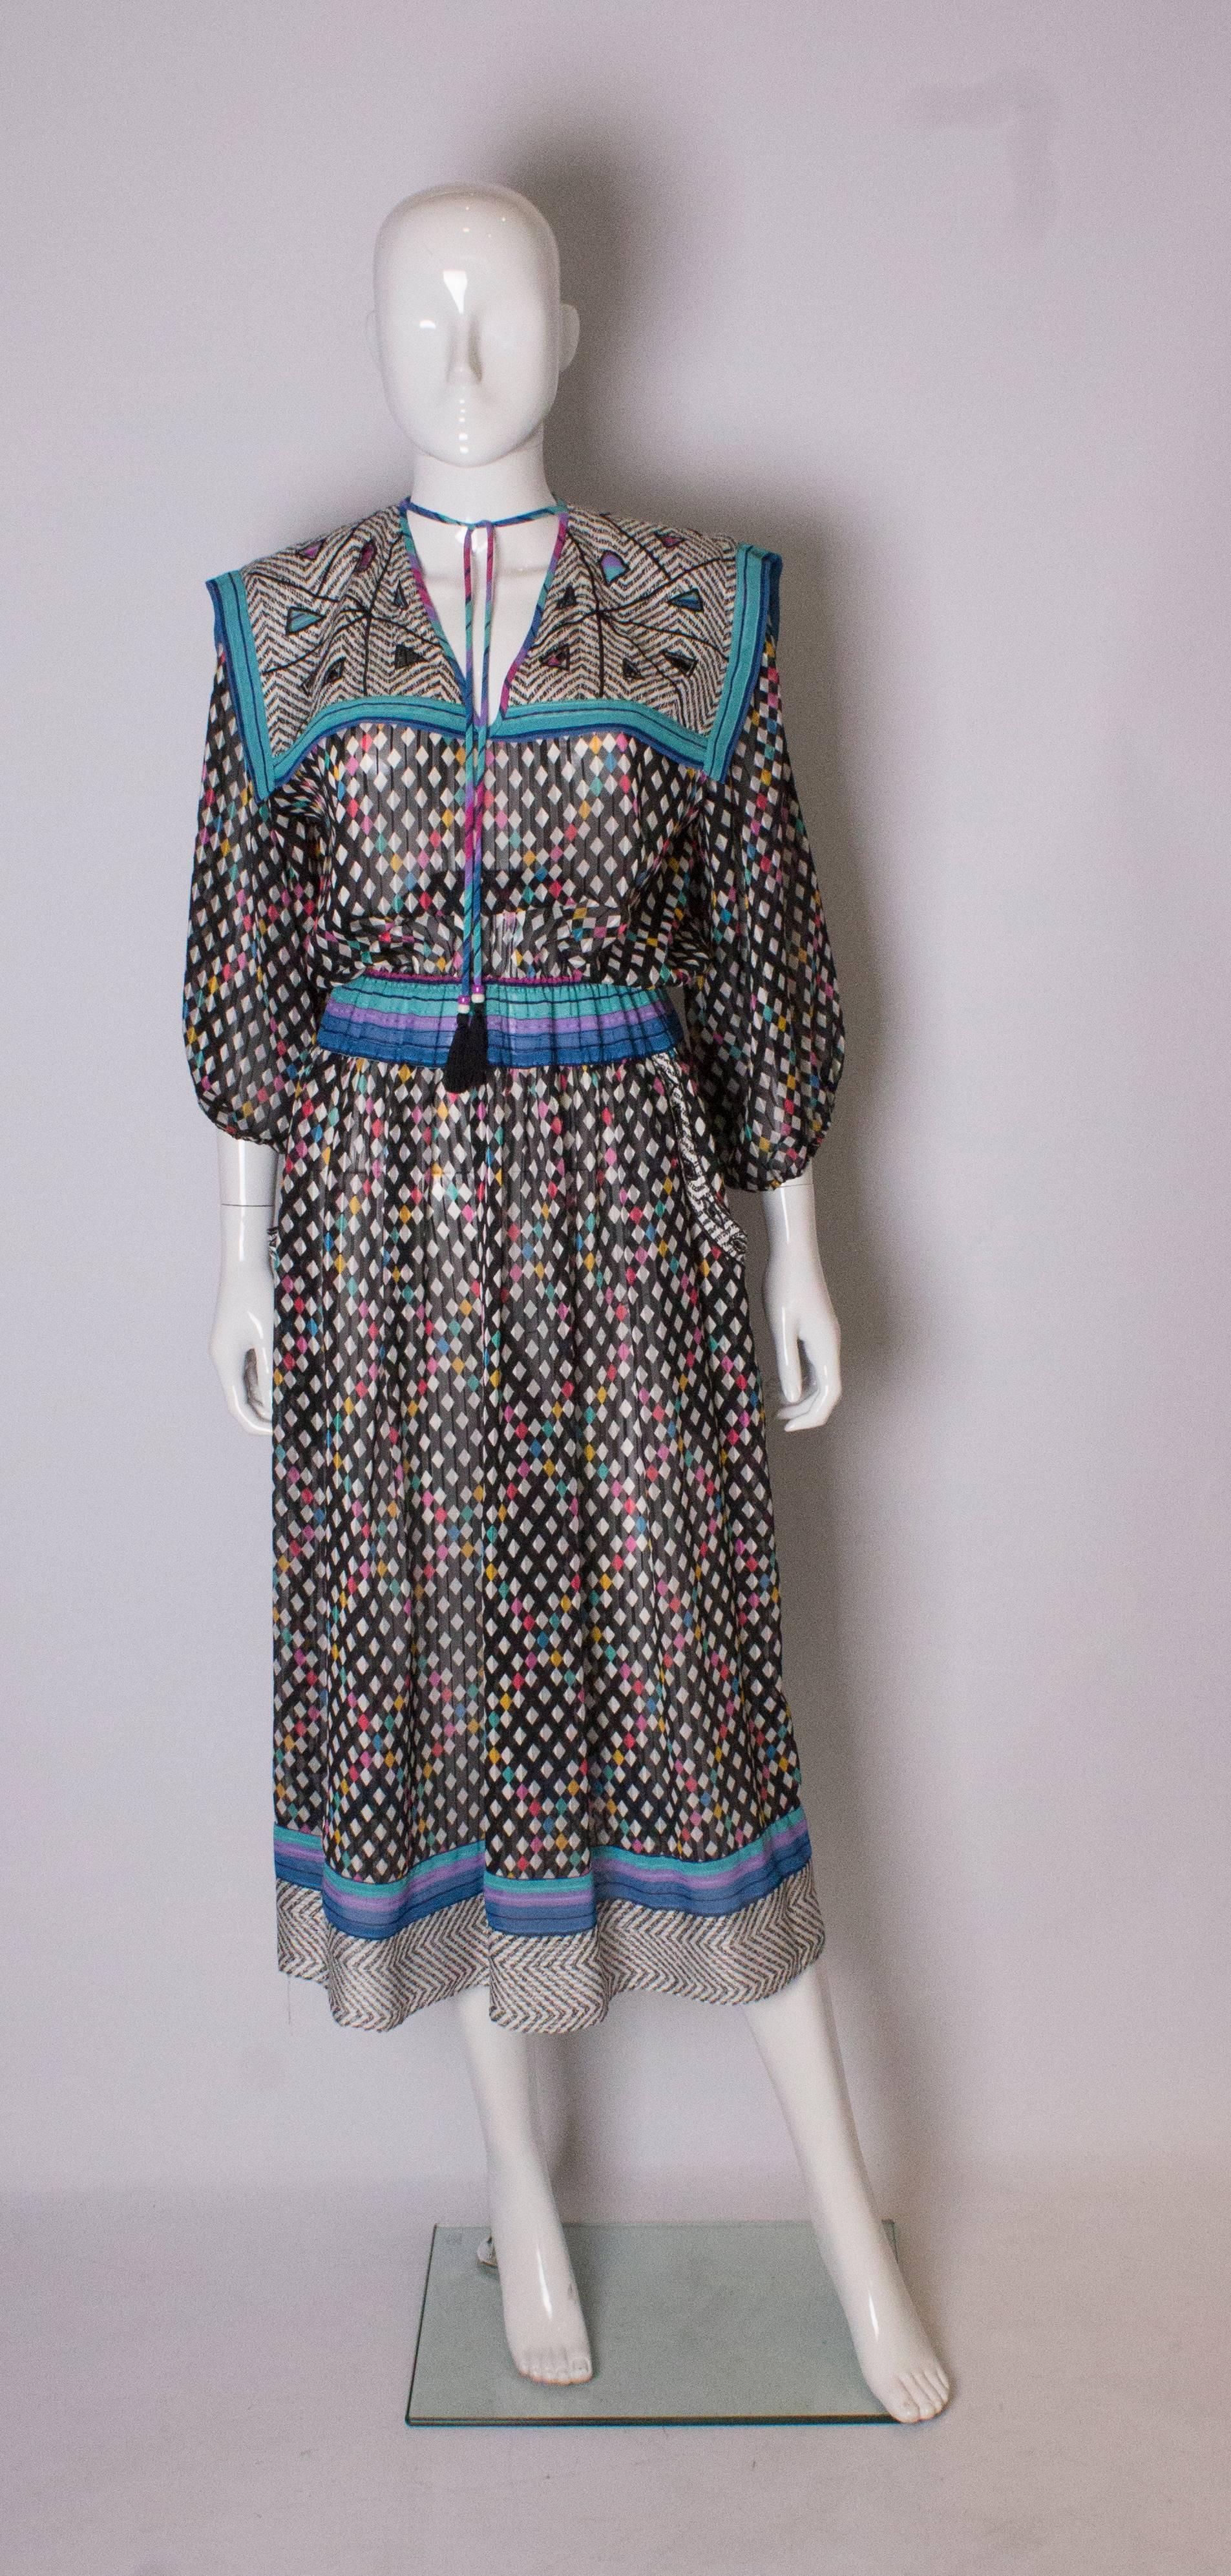 An easy to wear vintage dress by Diane Fres. The dress has elbow length sleeves with elasticated cuffs, a v neck with a large sailor collar with cut out detail. There are two pockets at hip leval, and the dress has an elasticated waist that